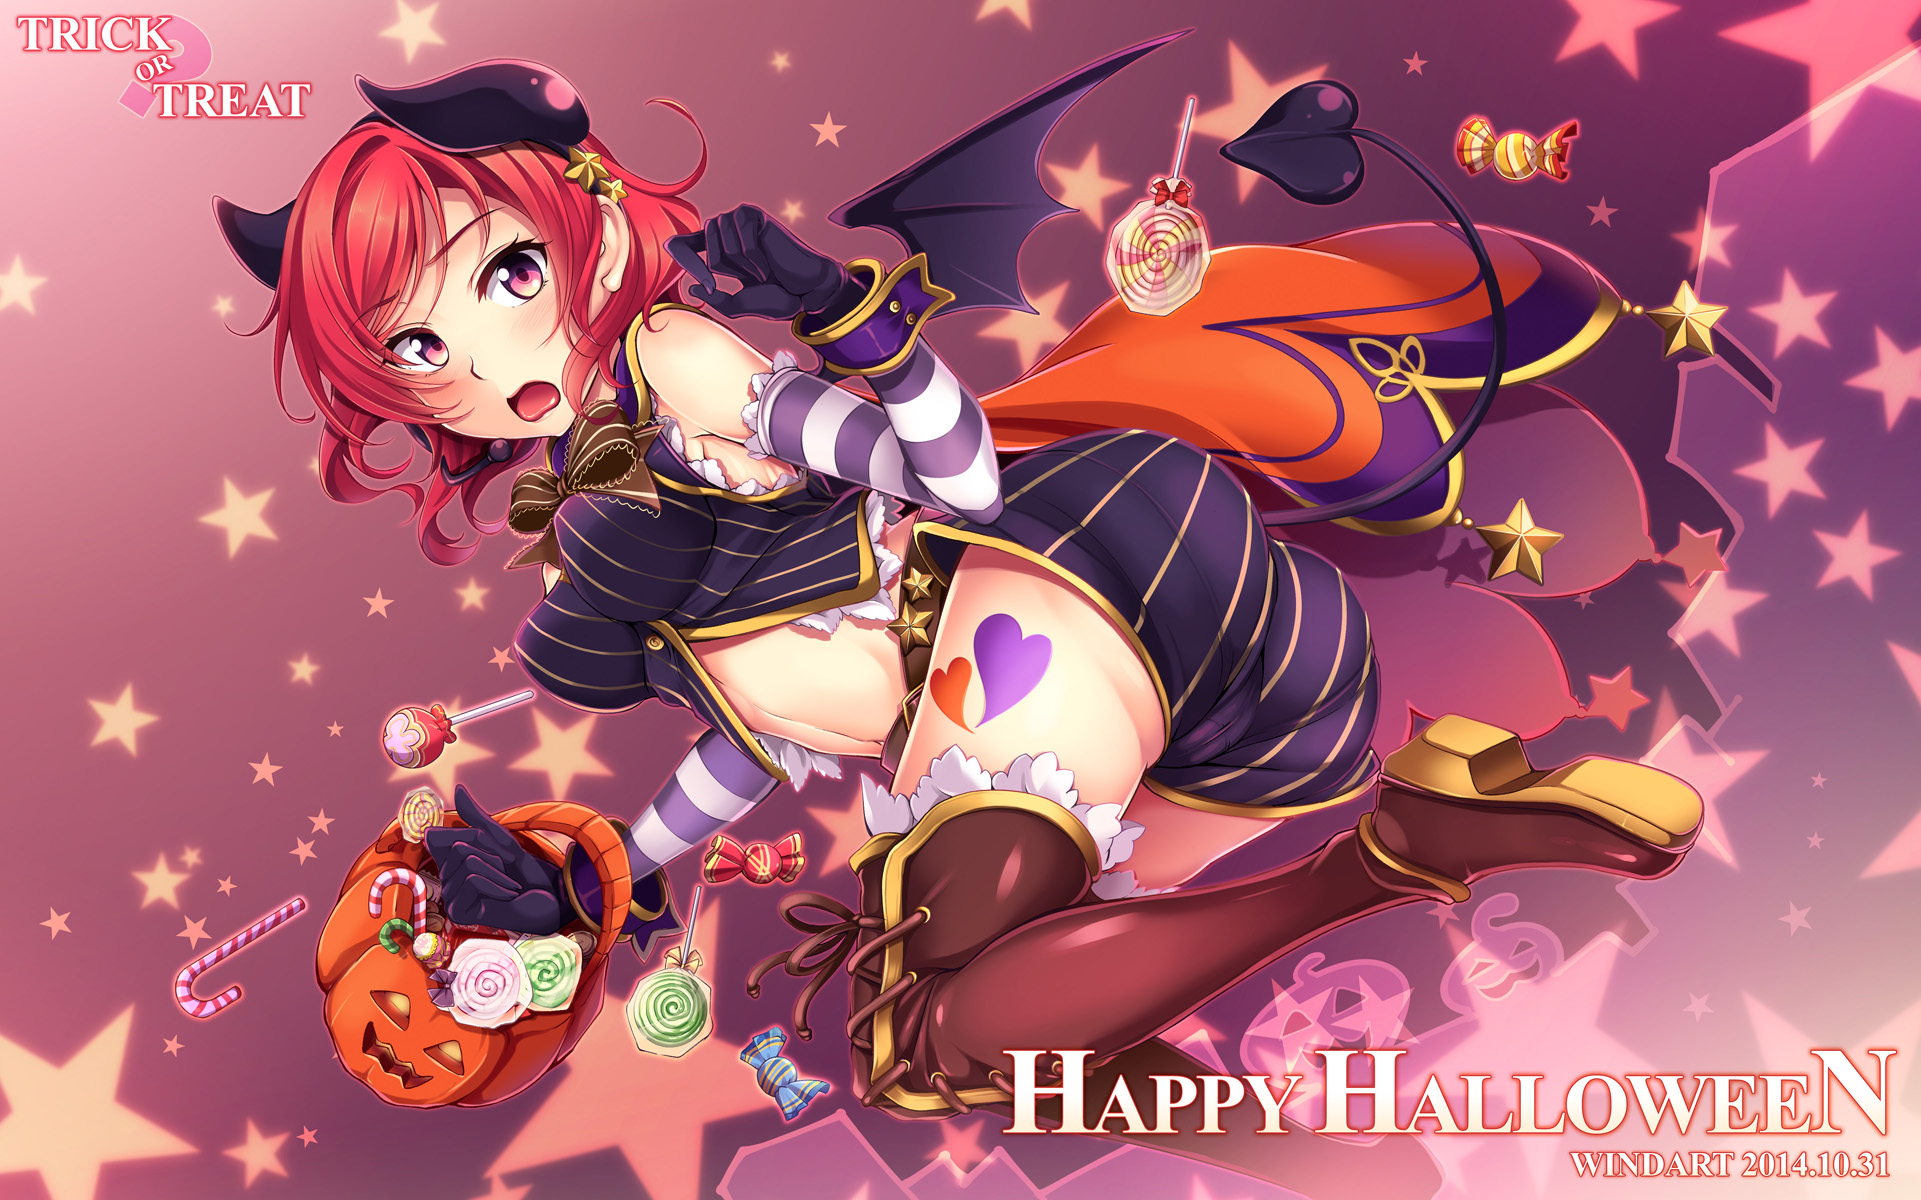 1000+ Love Live! HD Wallpapers and Backgrounds